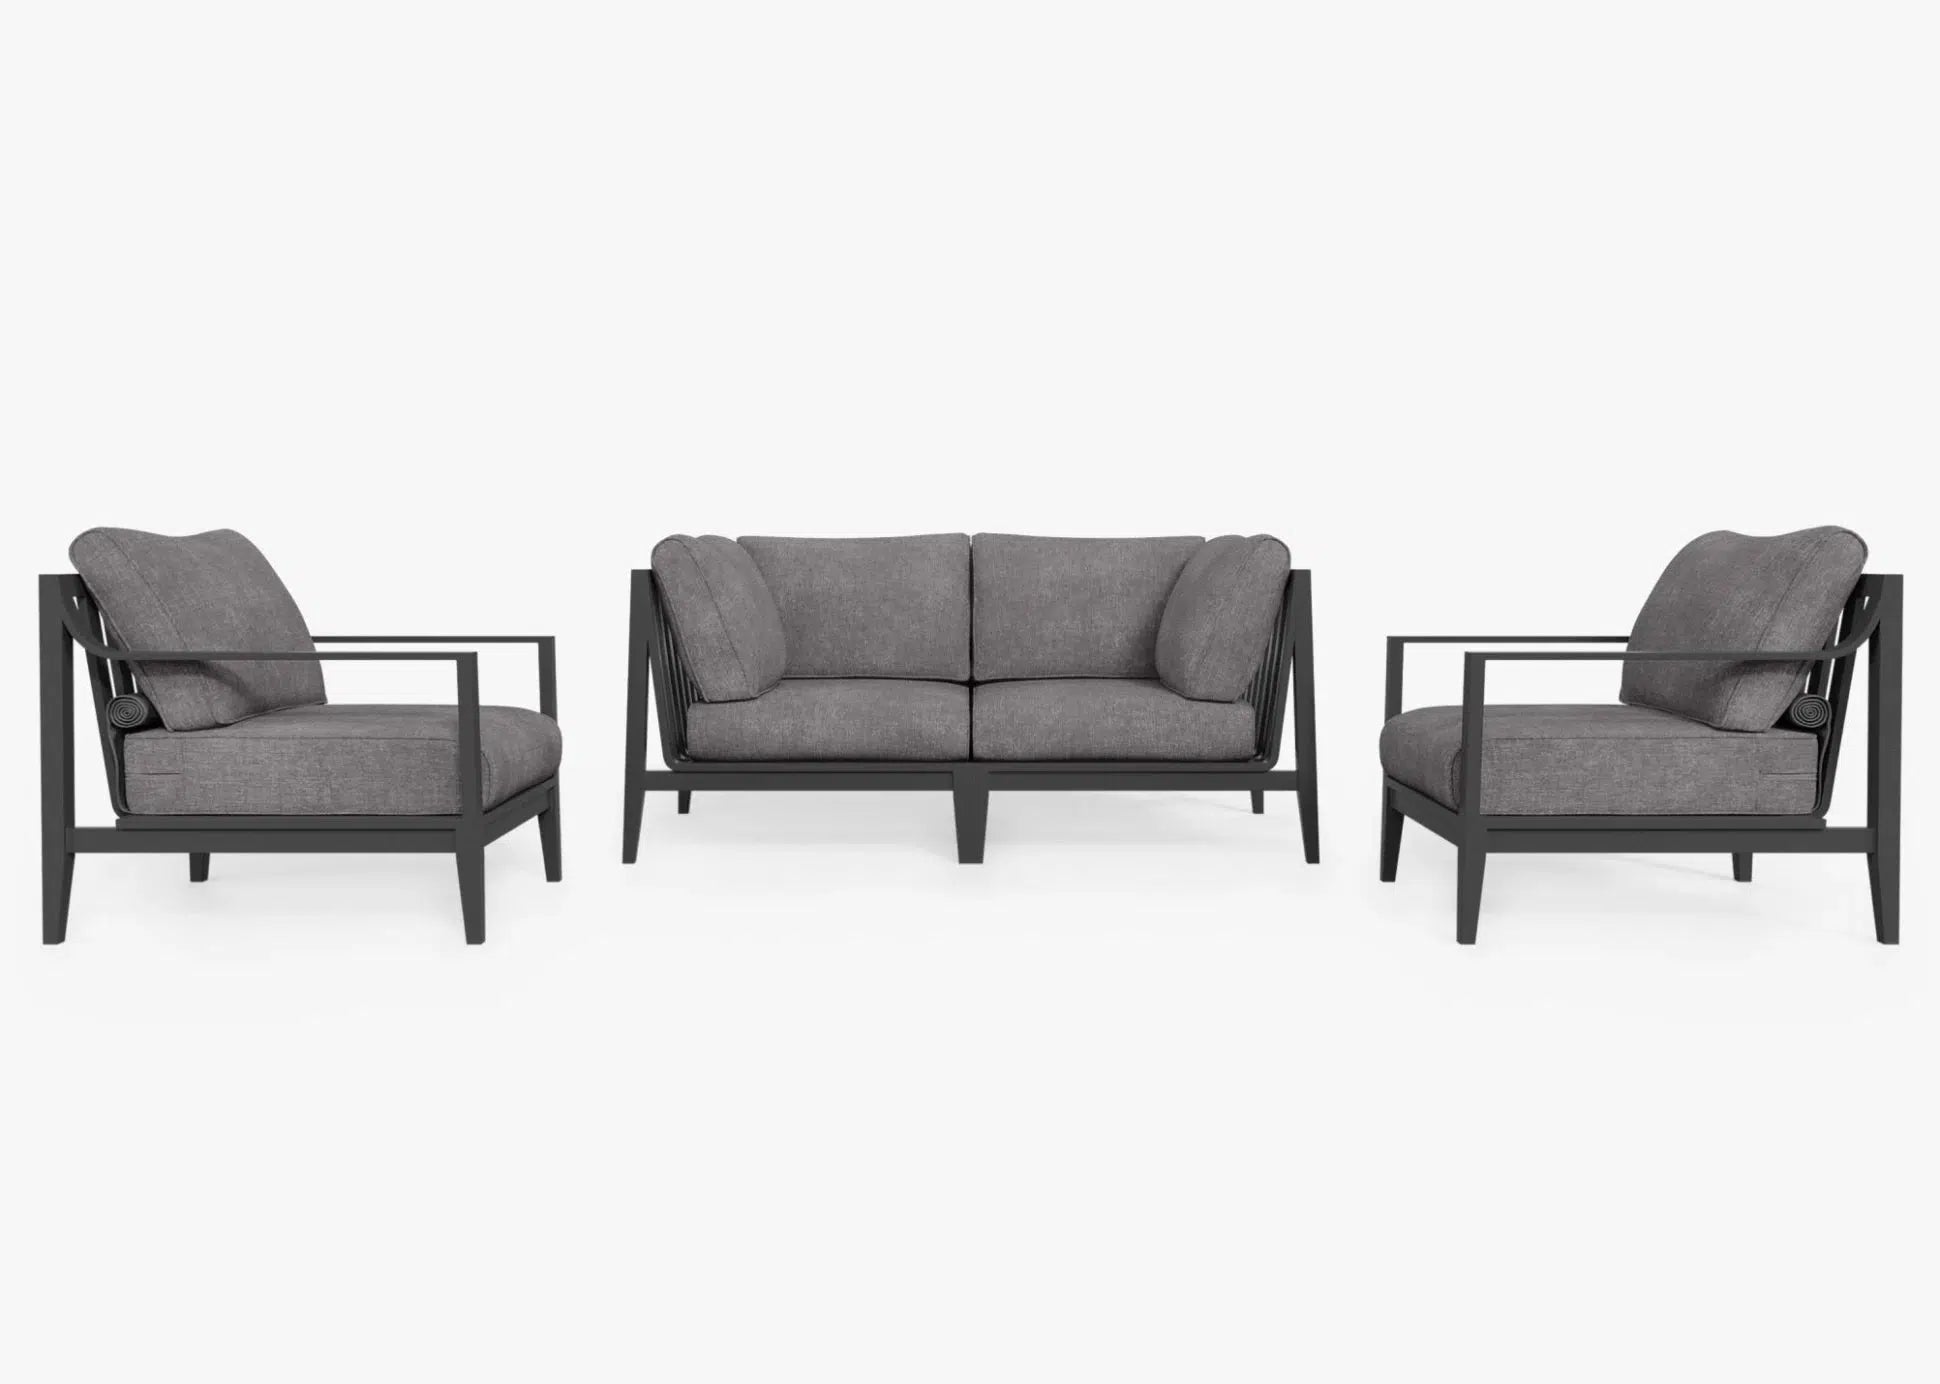 Live Outer 69" Charcoal Aluminum Outdoor Loveseat With Armchairs & Dark Pebble Gray Cushion (4-Seat)